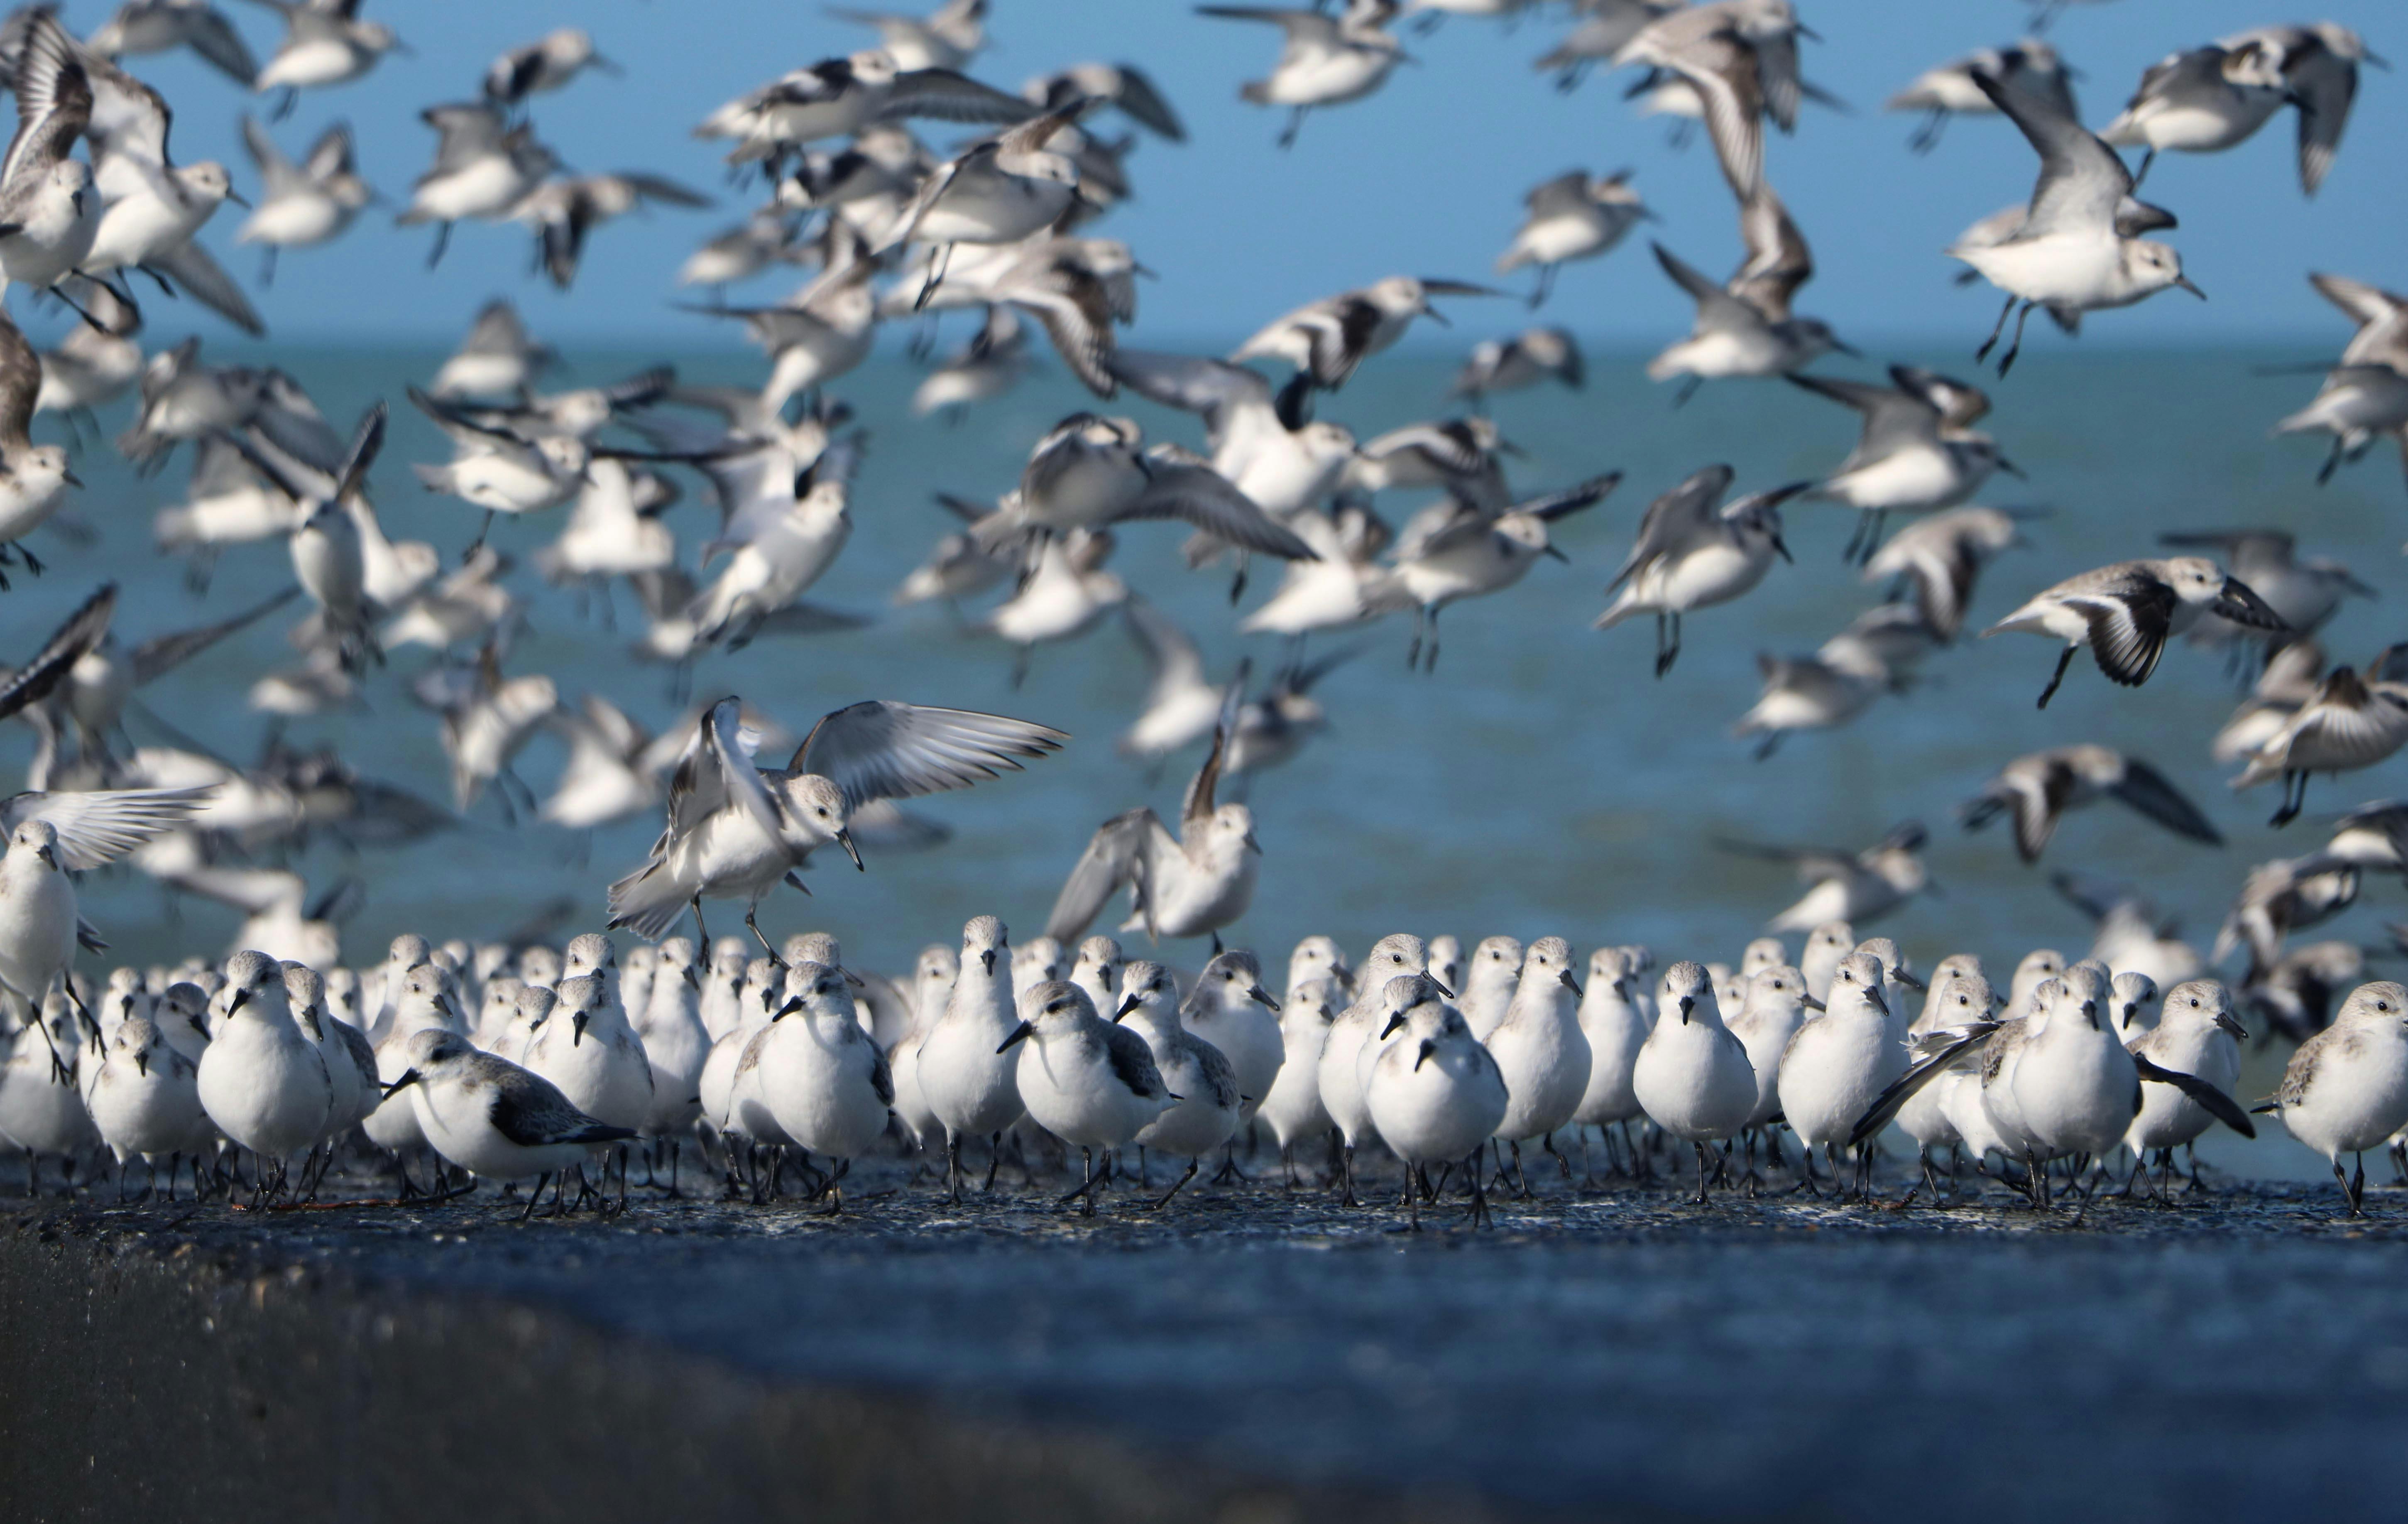 File:Flock of Birds - Flickr - Picture Perfect Pose.jpg - Wikimedia Commons